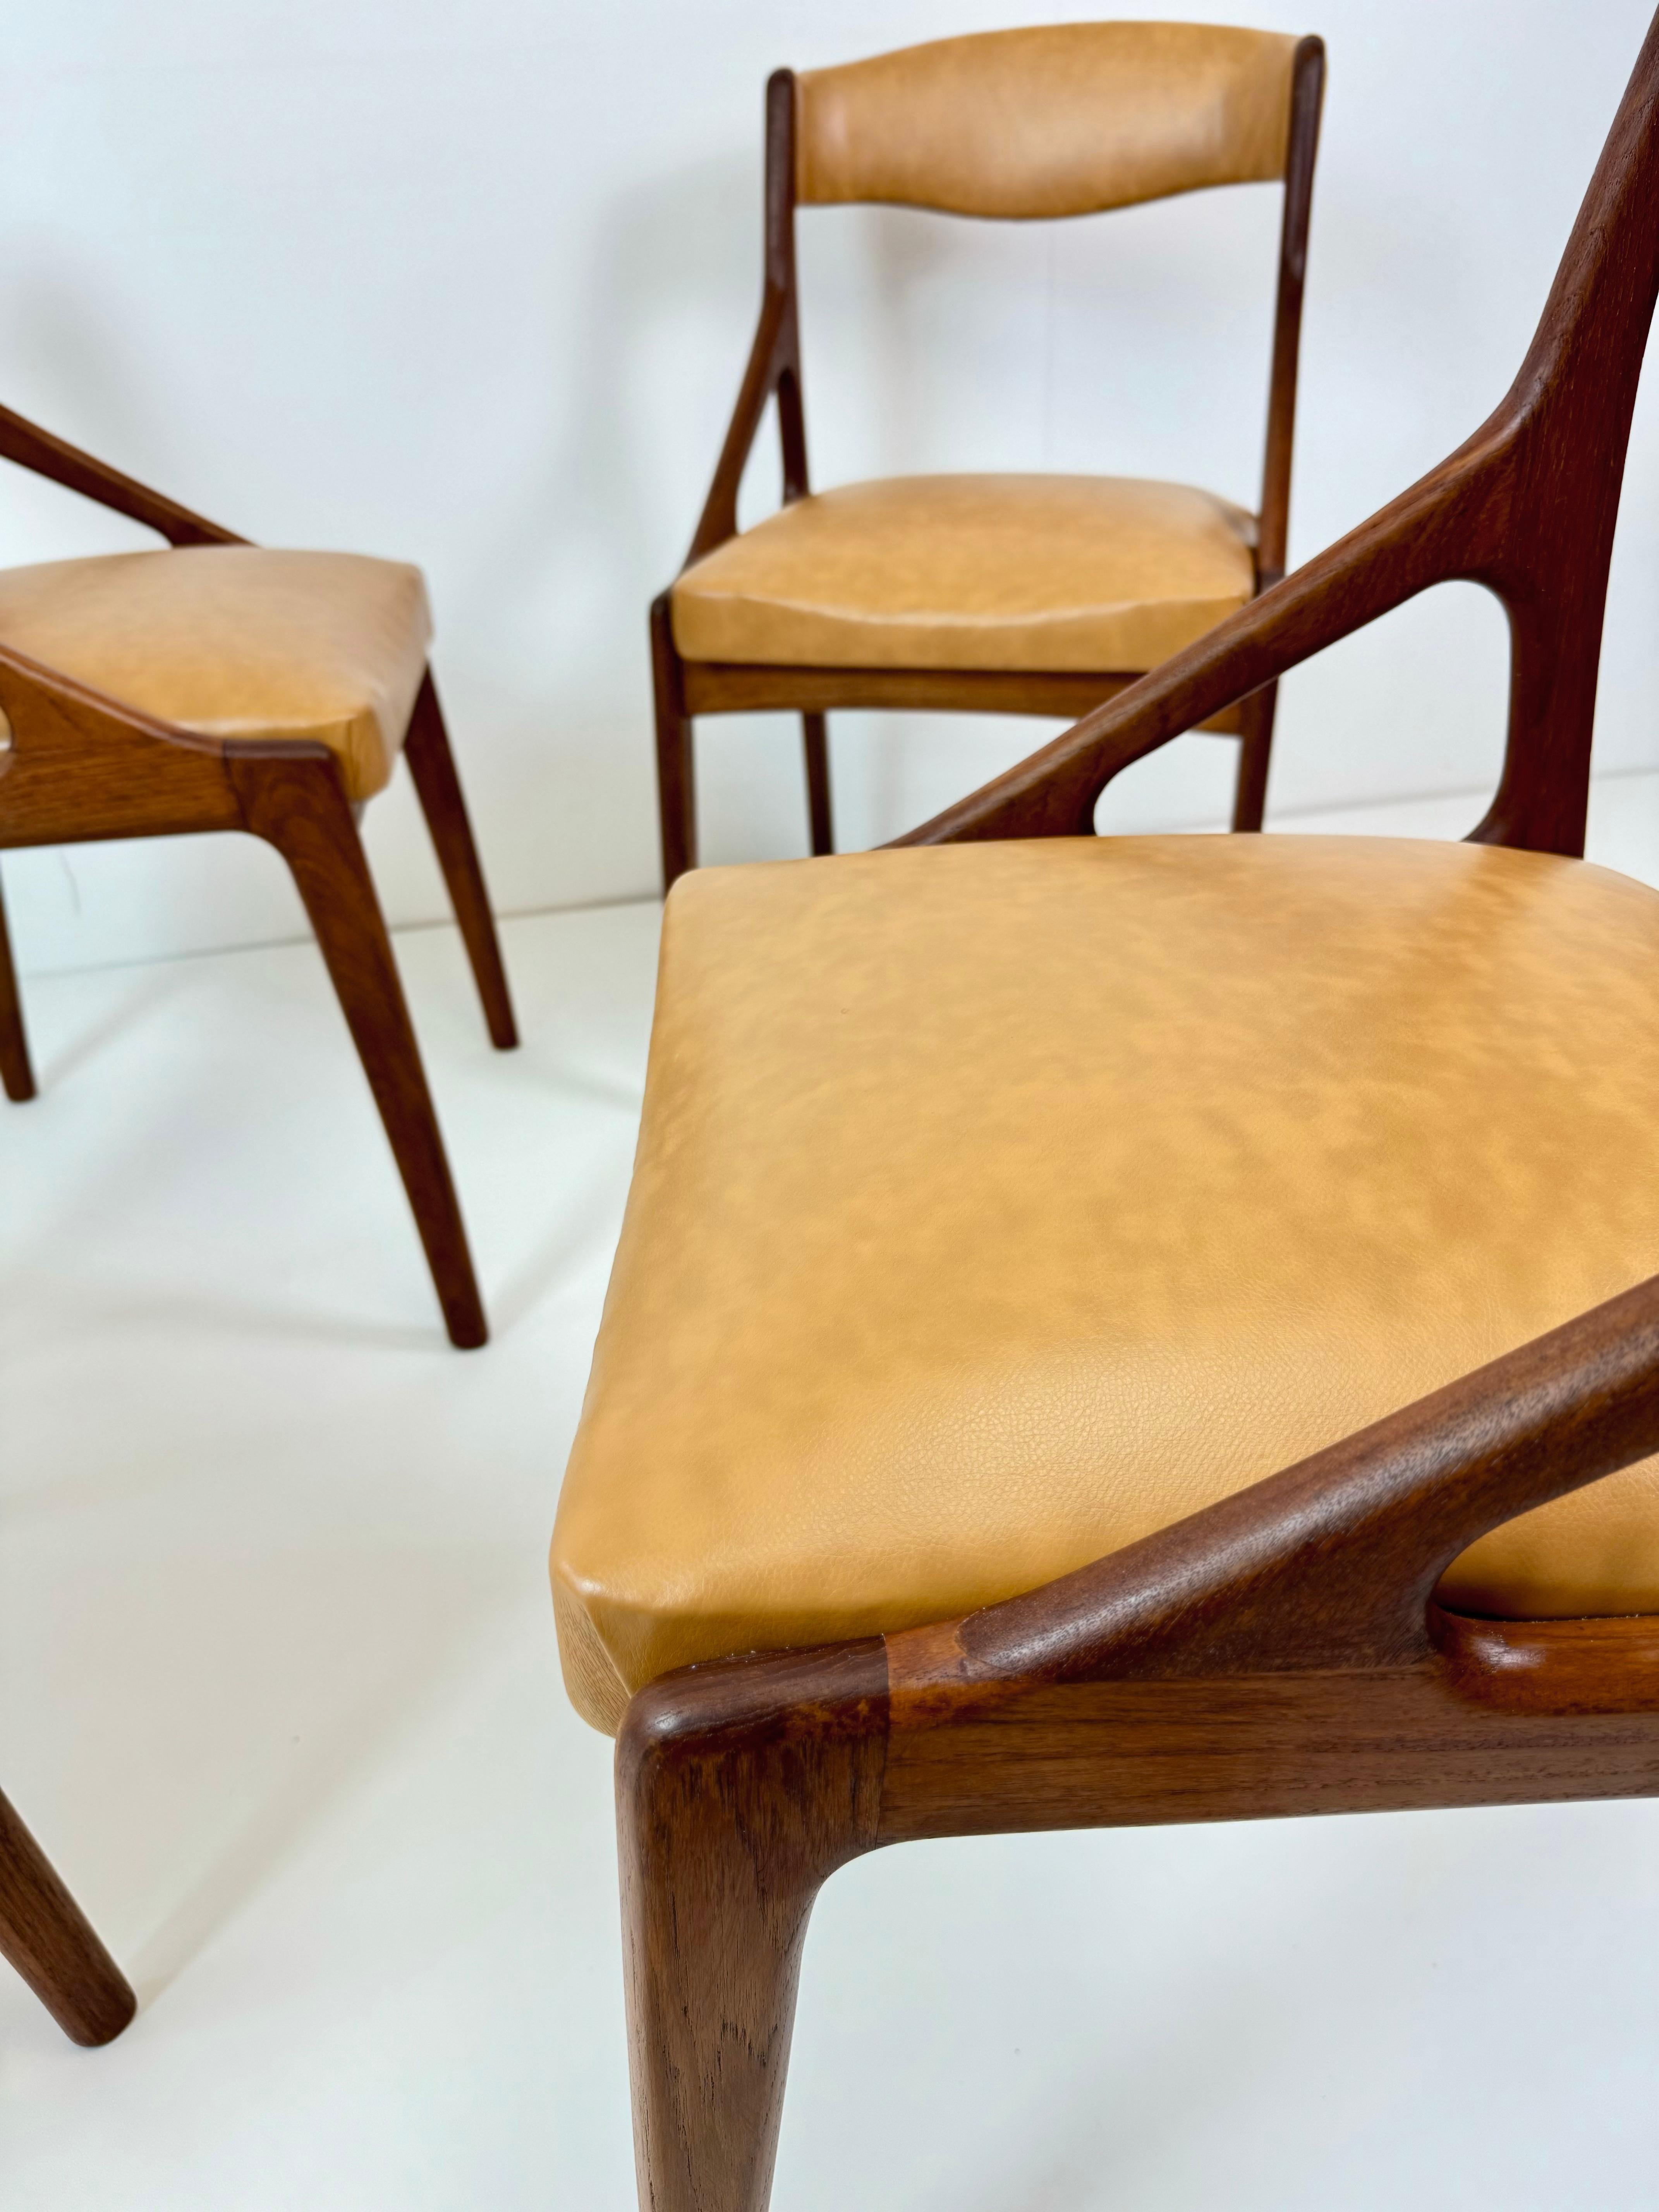 Joinery Set of Four Midcentury Modern Teak and Leatherette Dining Chairs c.1960's For Sale